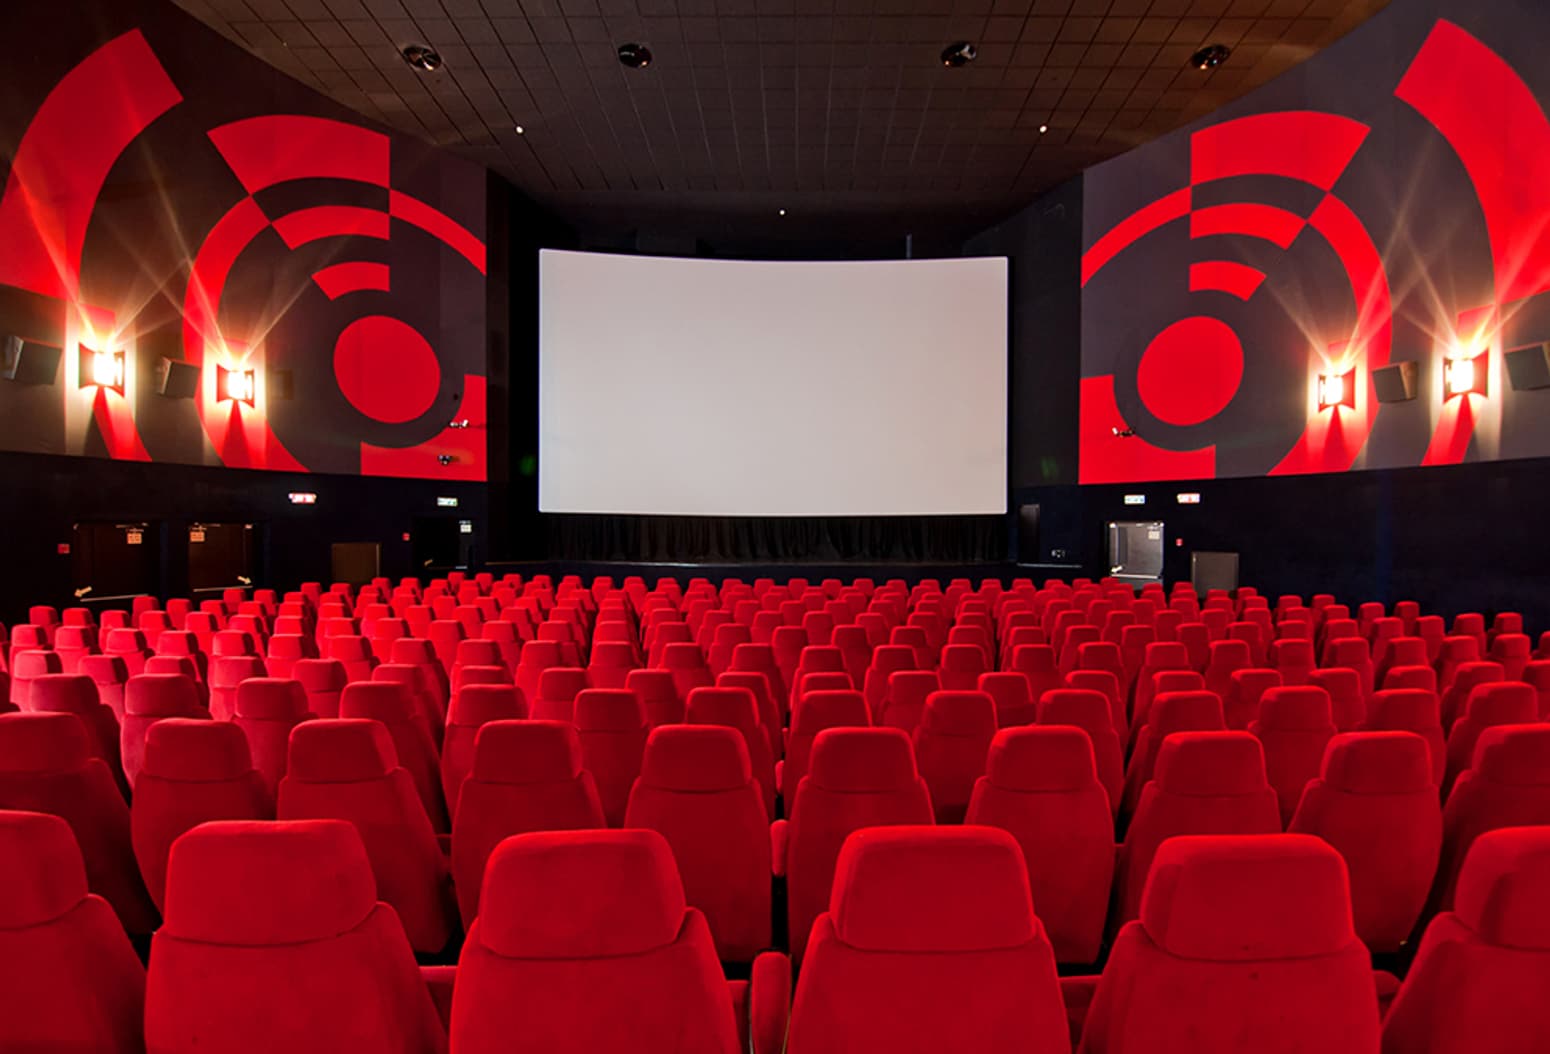 See FabriTRAK systems in action in this movie auditorium.